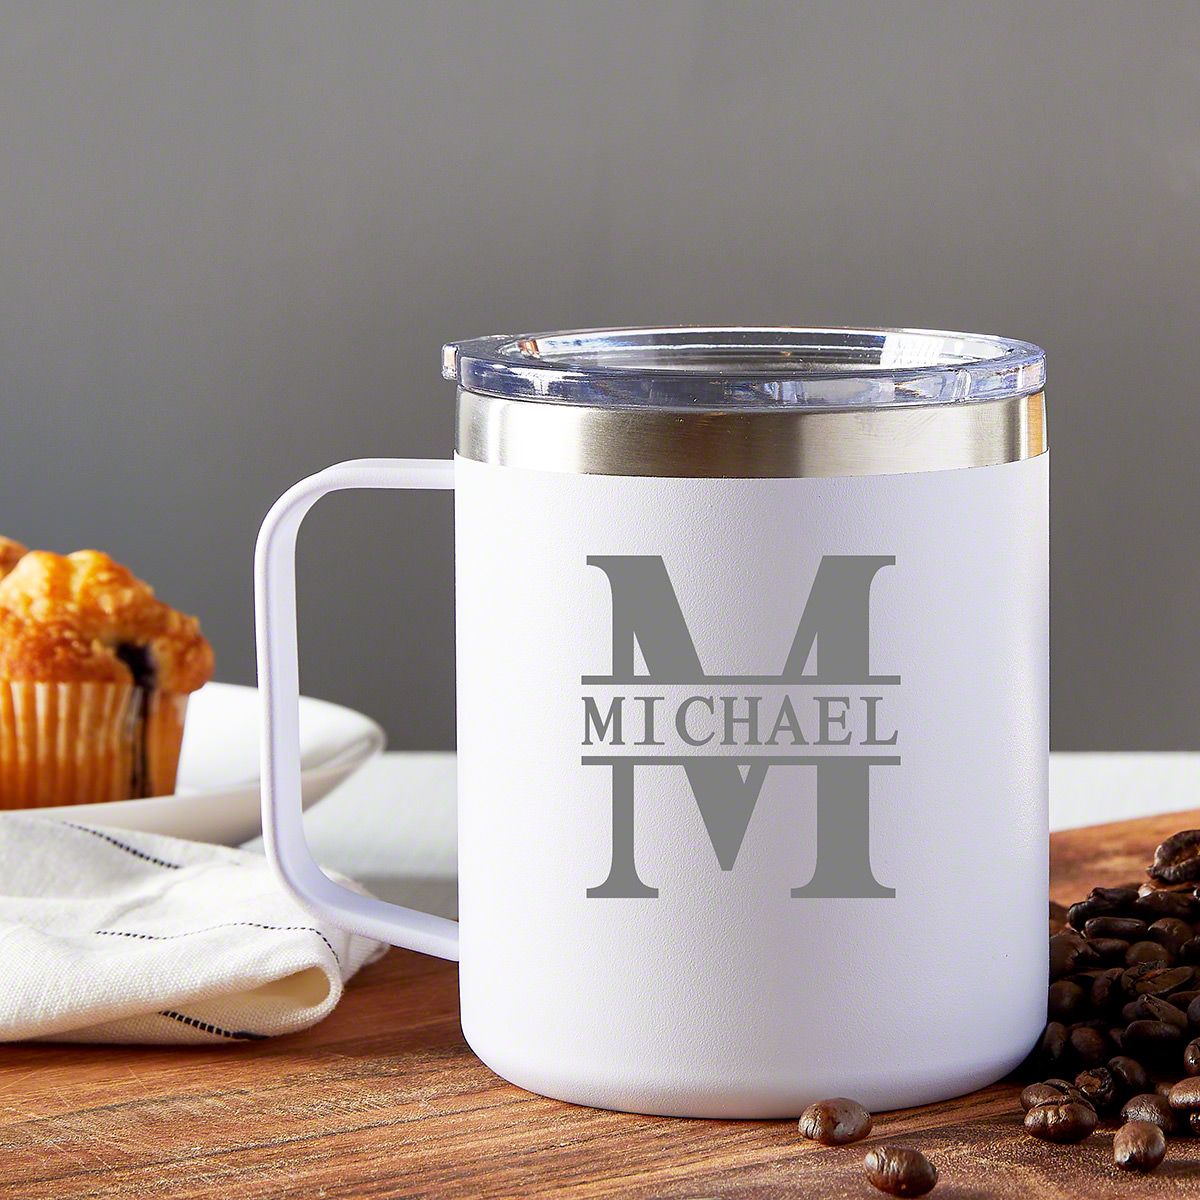 Personalized Insulated Coffee Mug with Lid - 12 oz -Customize with Name or  Text - Custom Travel Cup